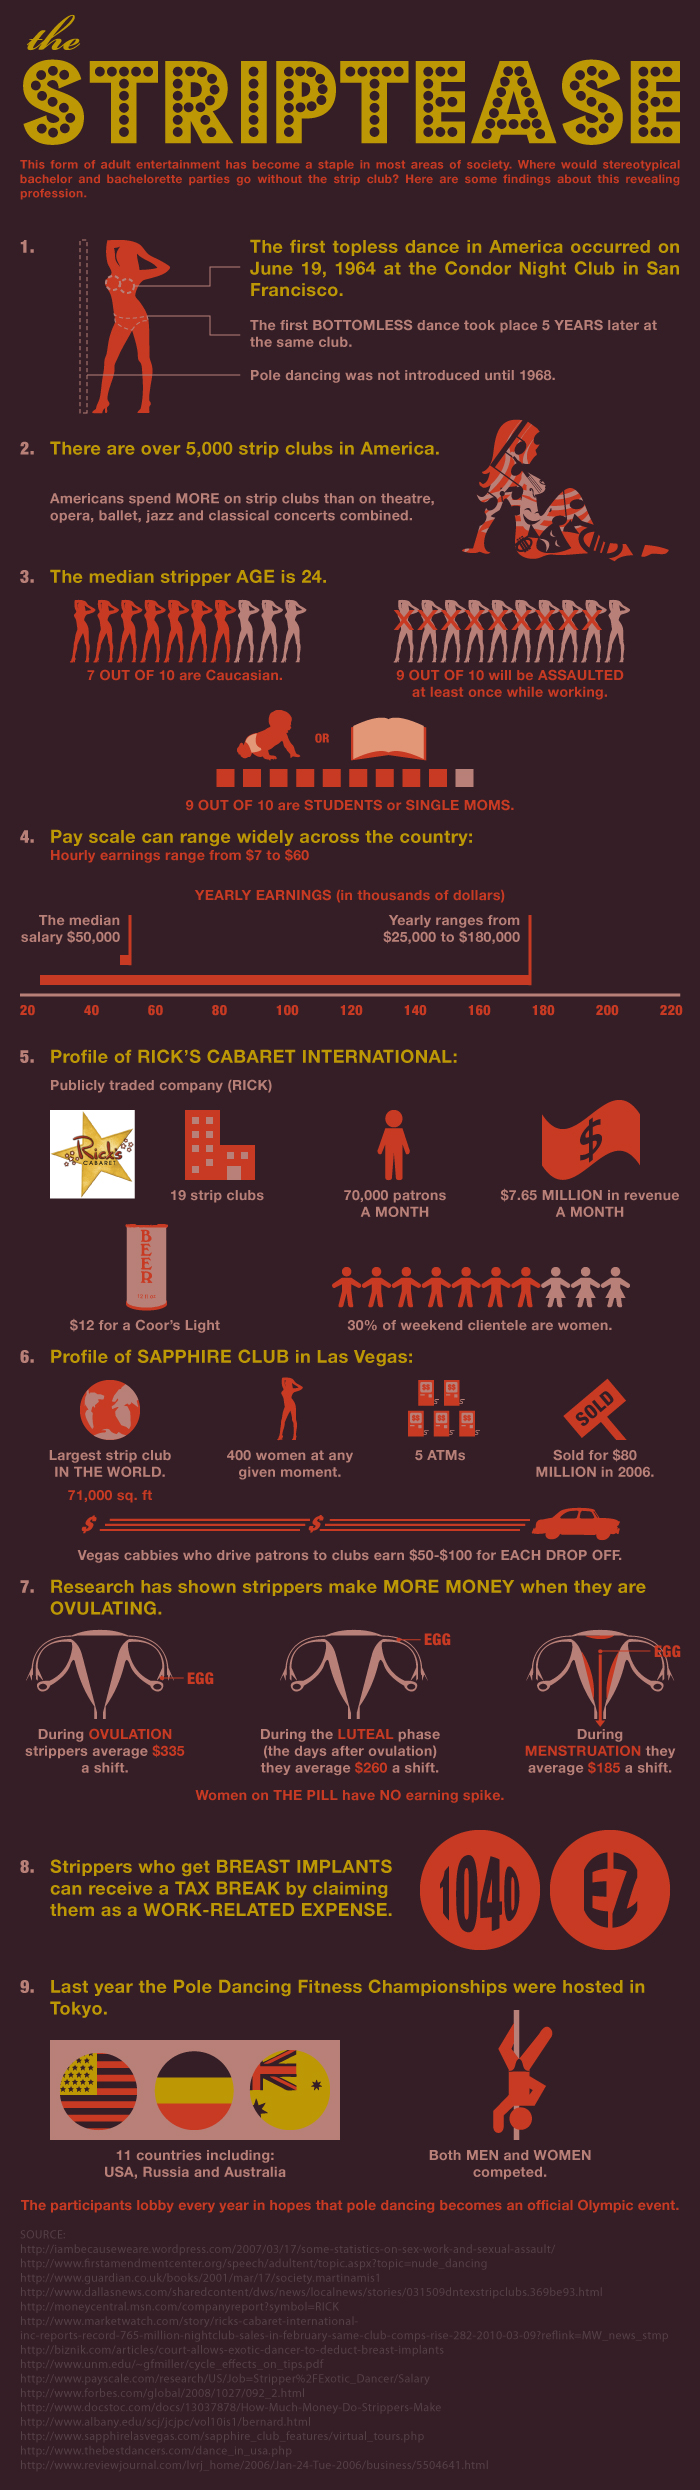 just some useful information about strip clubs.